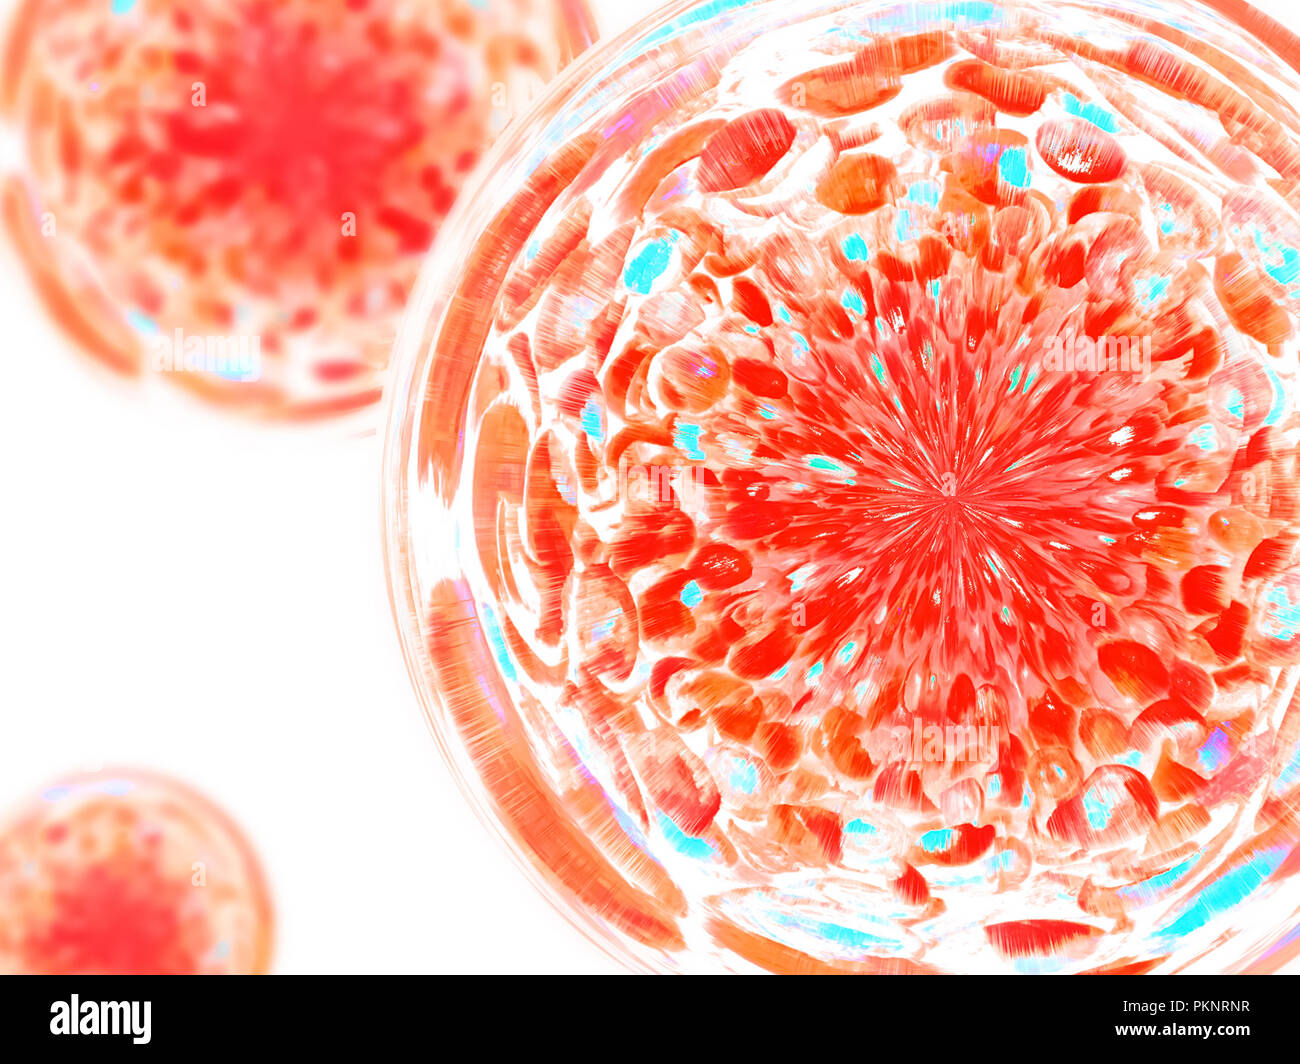 Bacteria, Cells, Spores, Microbes - Abstract Illustration Stock Photo